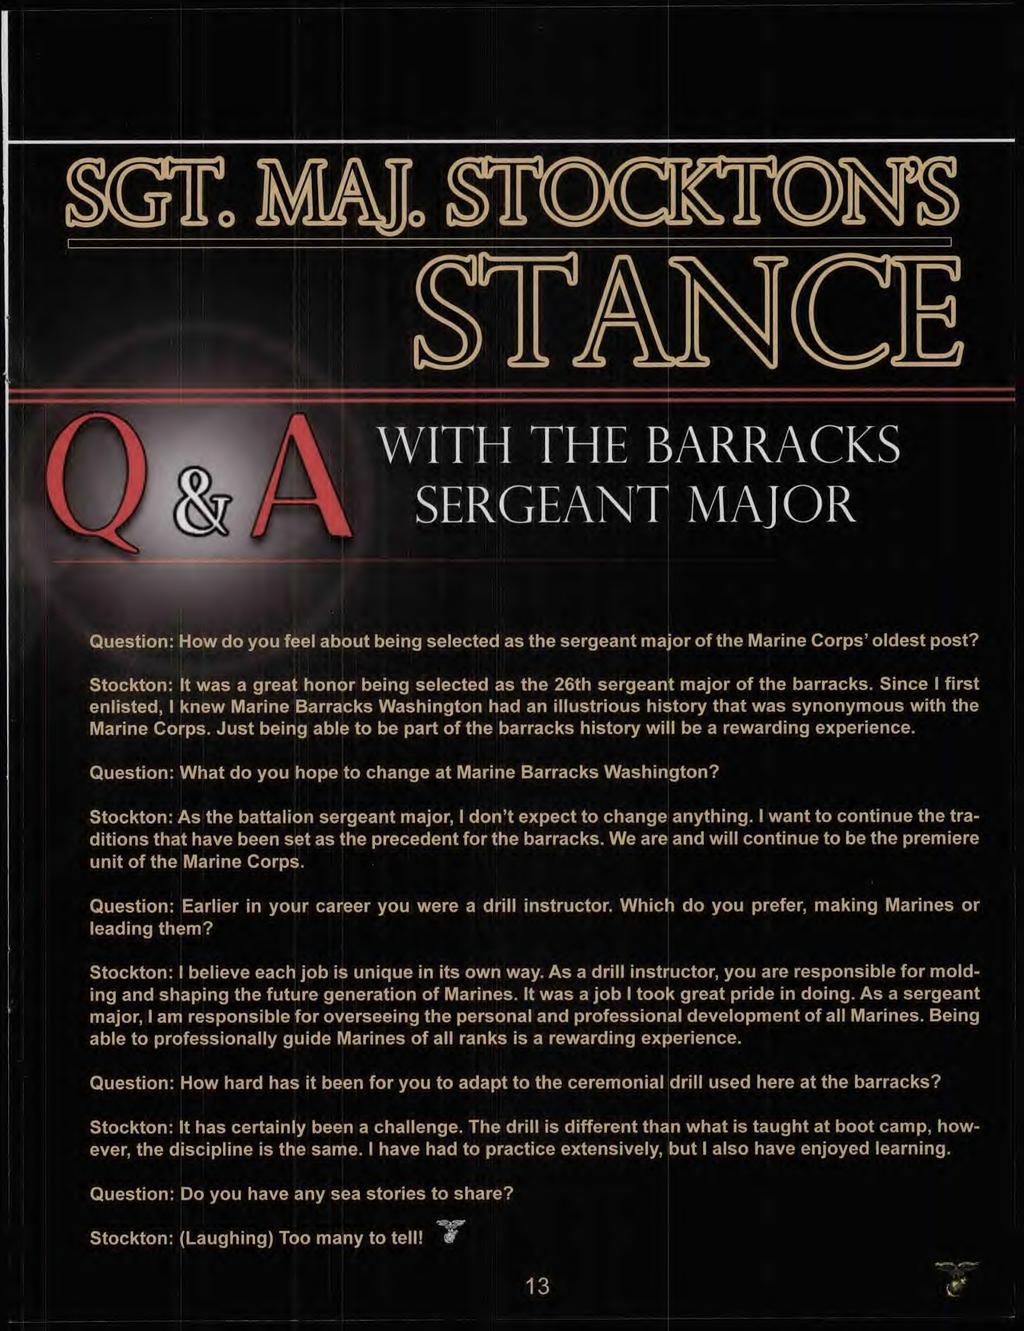 SGT. M A Jo ST 0 OKT ons _. ST NcE ilk WITH THE BARRACK SERGEANT MAJO' Question: How do ou feel about being selected as the sergeant major of the Marine Corps' oldest post?